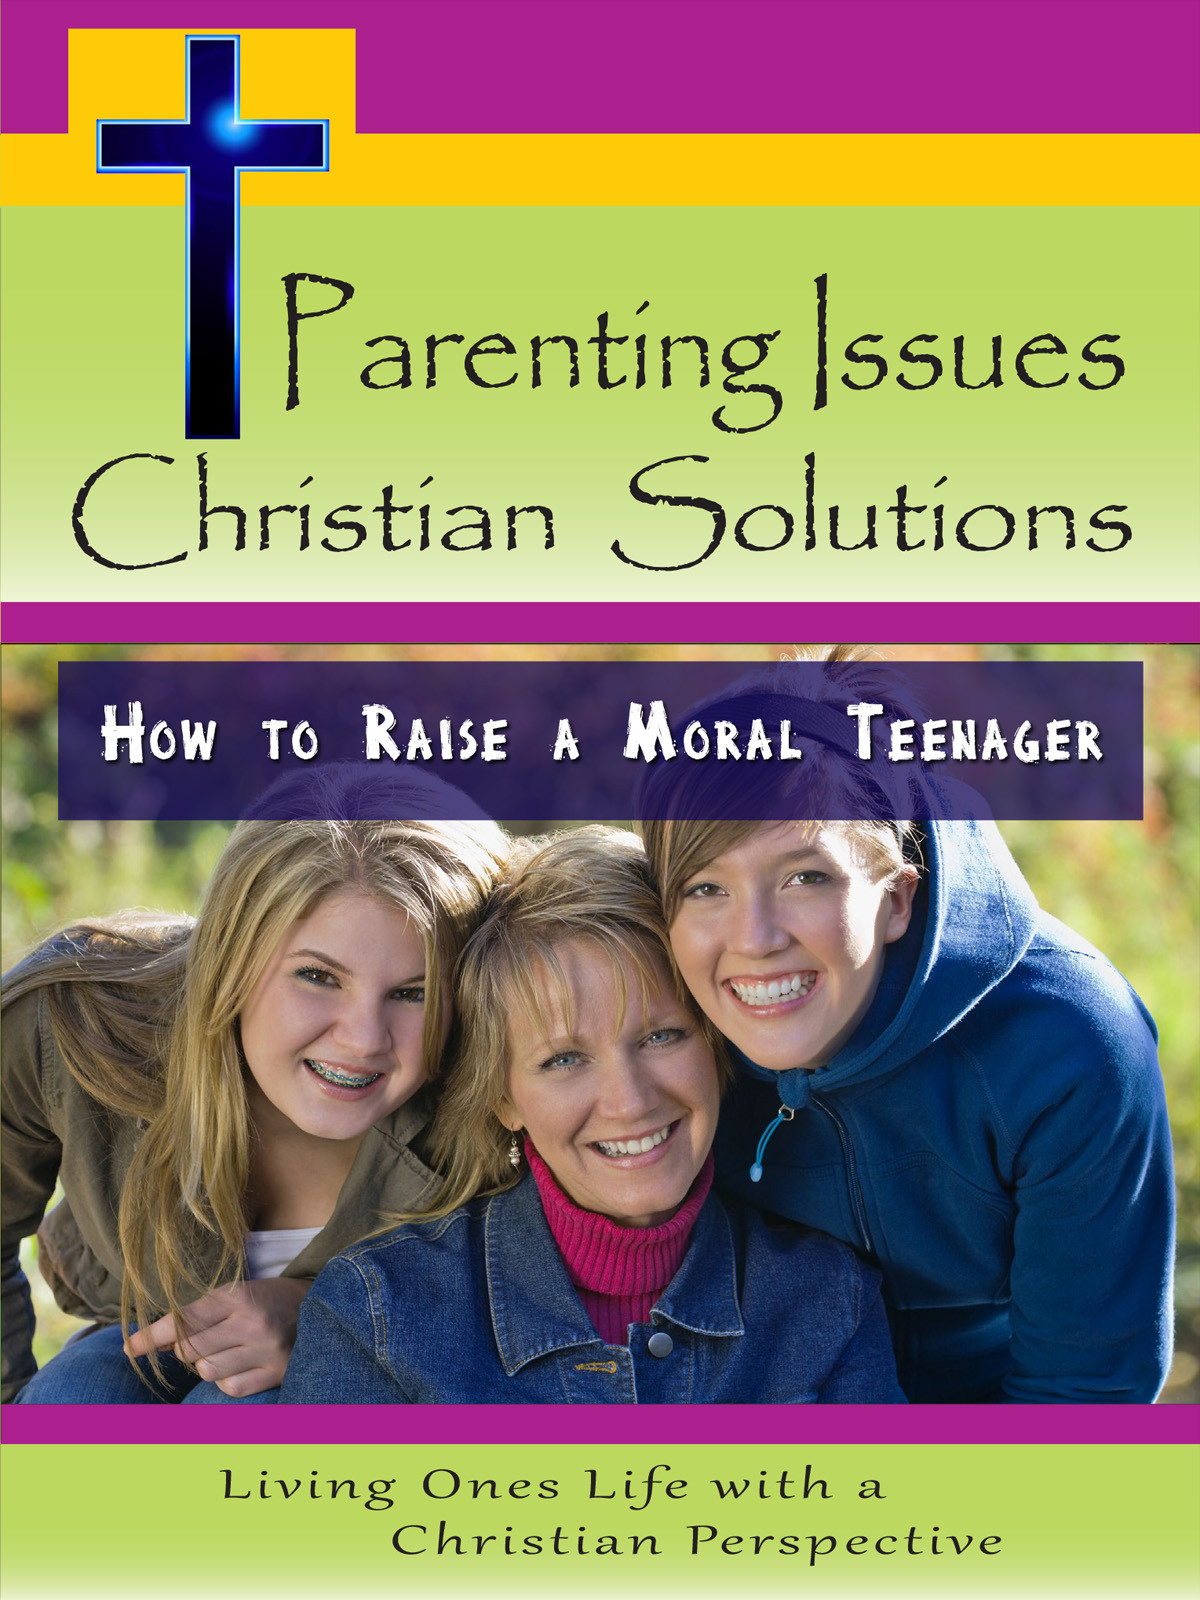 CH9996 - How to Raise a Moral Teenager